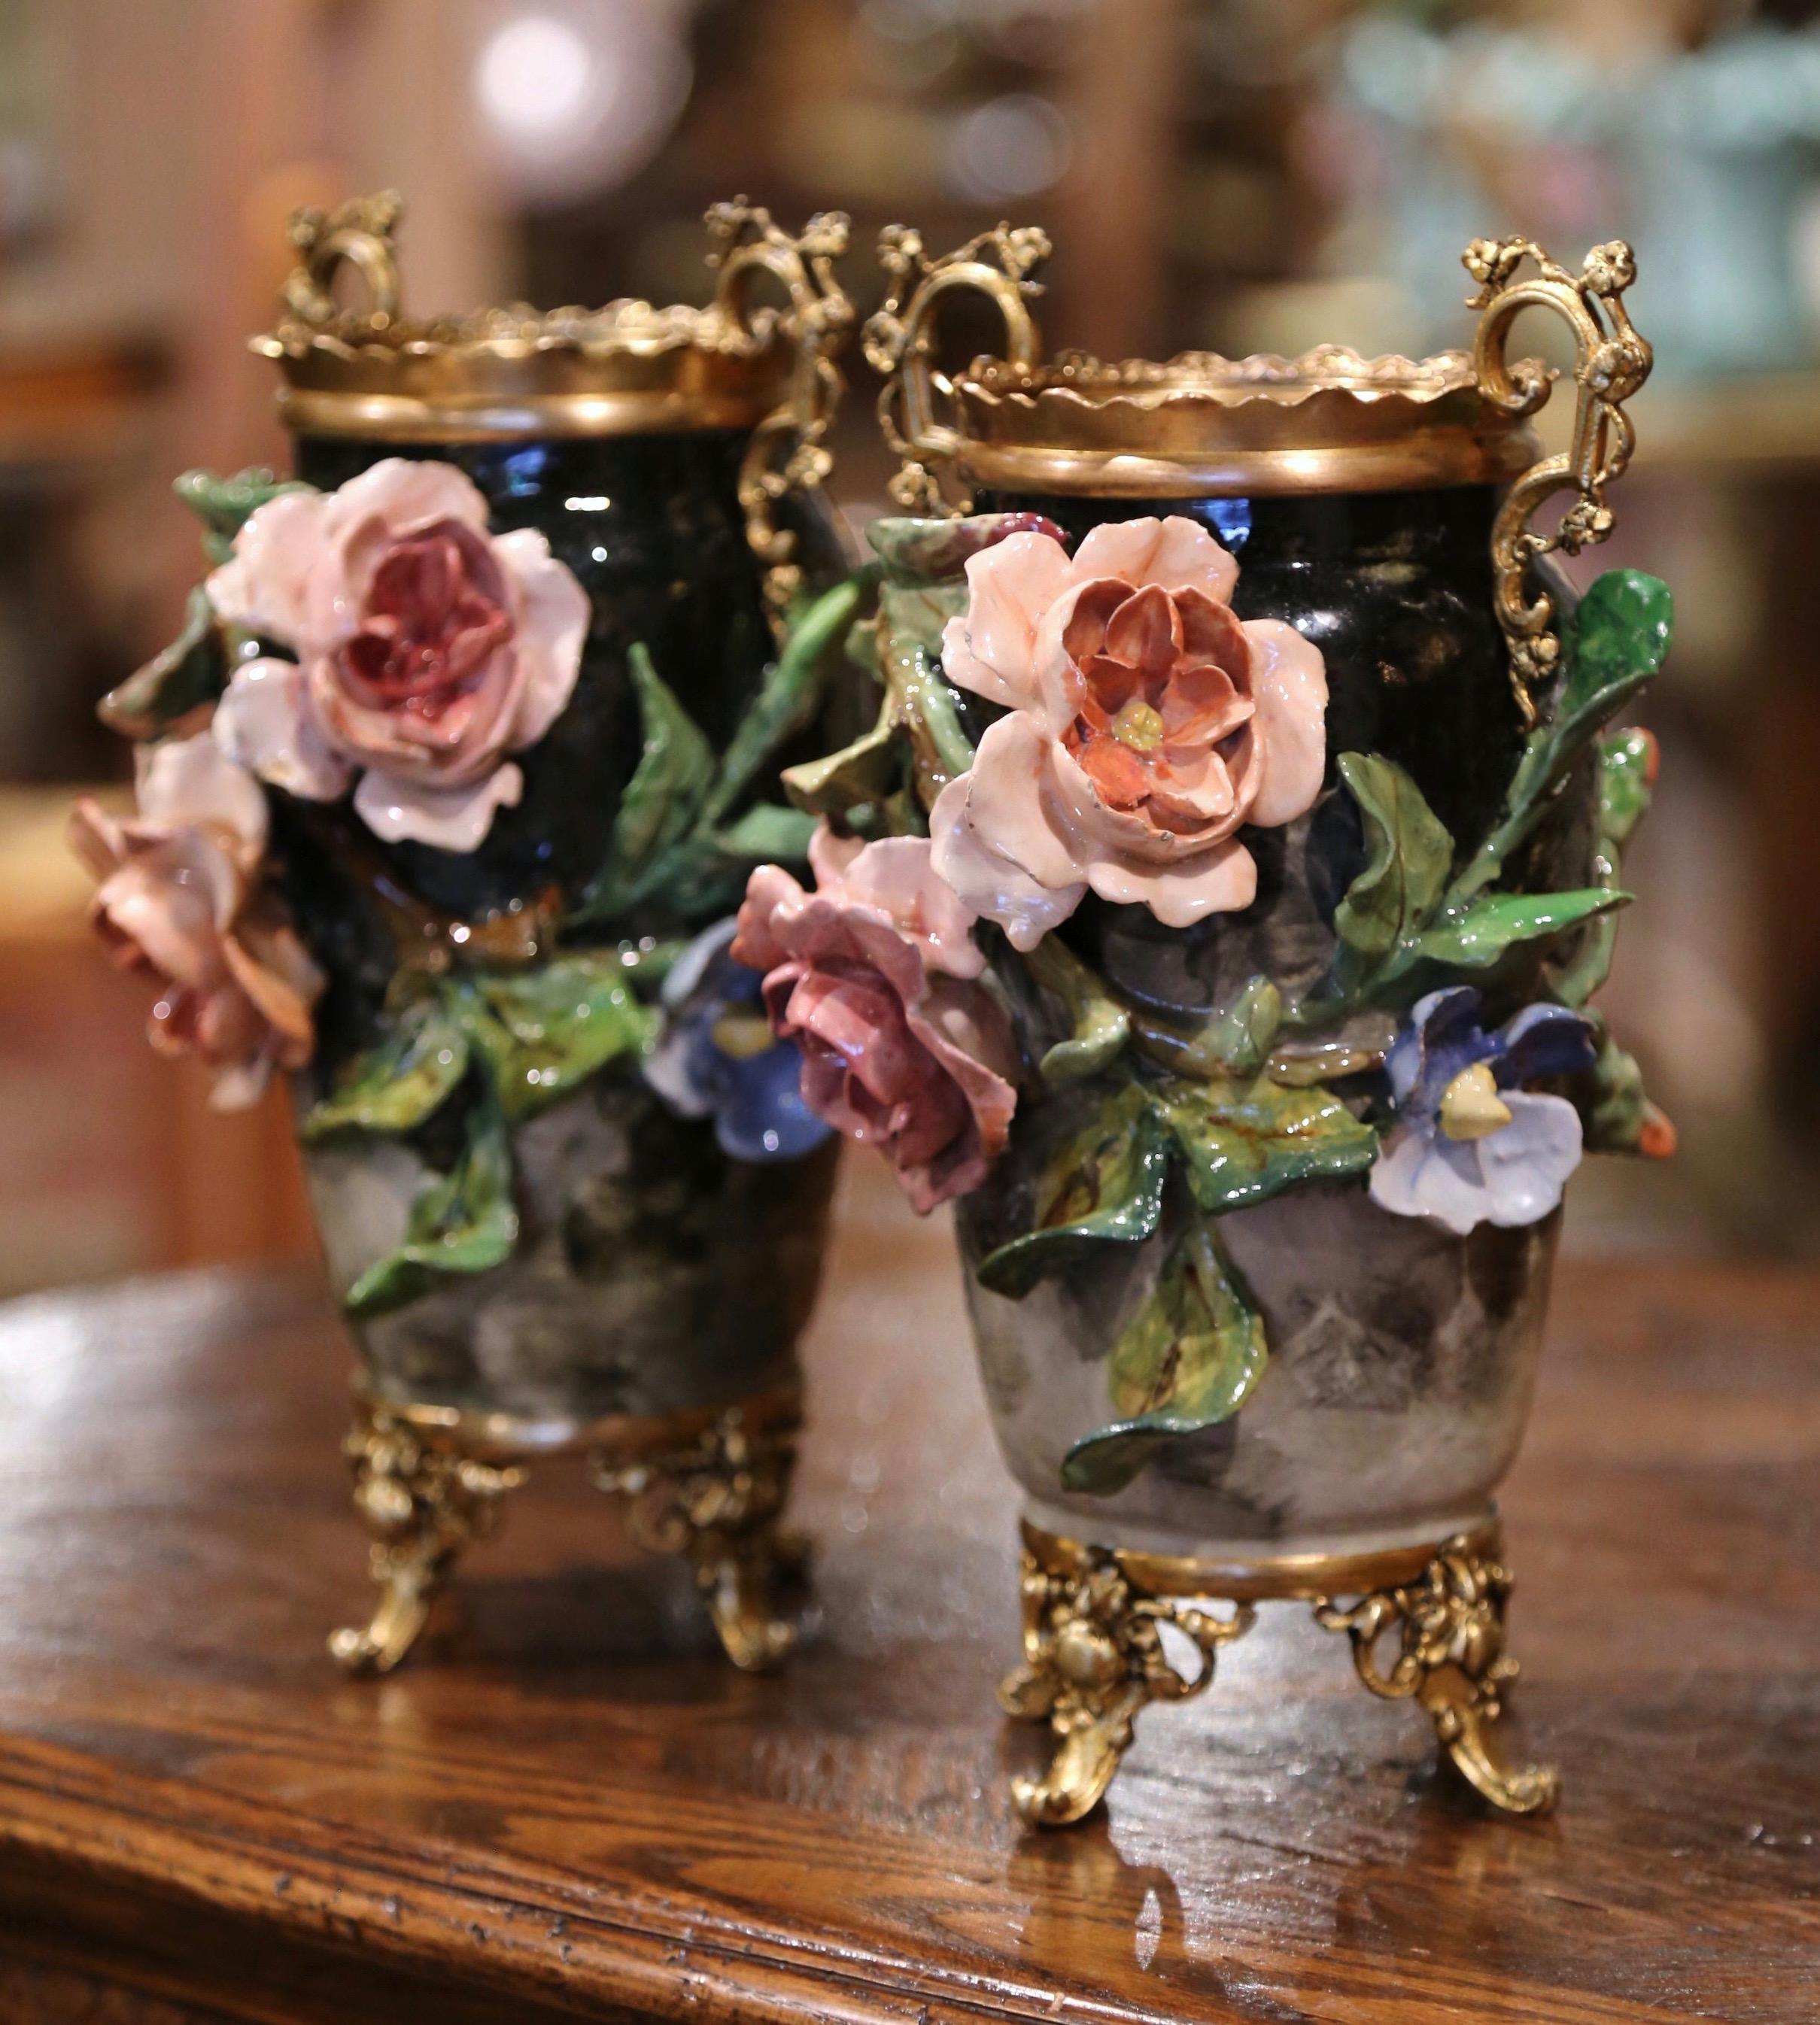 Decorate a kitchen counter or display a shelf with this elegant pair of antique Majolica vases. Crafted in Montigny sur Loing, France circa 1860, each ornate vase sits on a brass base with scrolled feet, and features colorful hand painted flowers